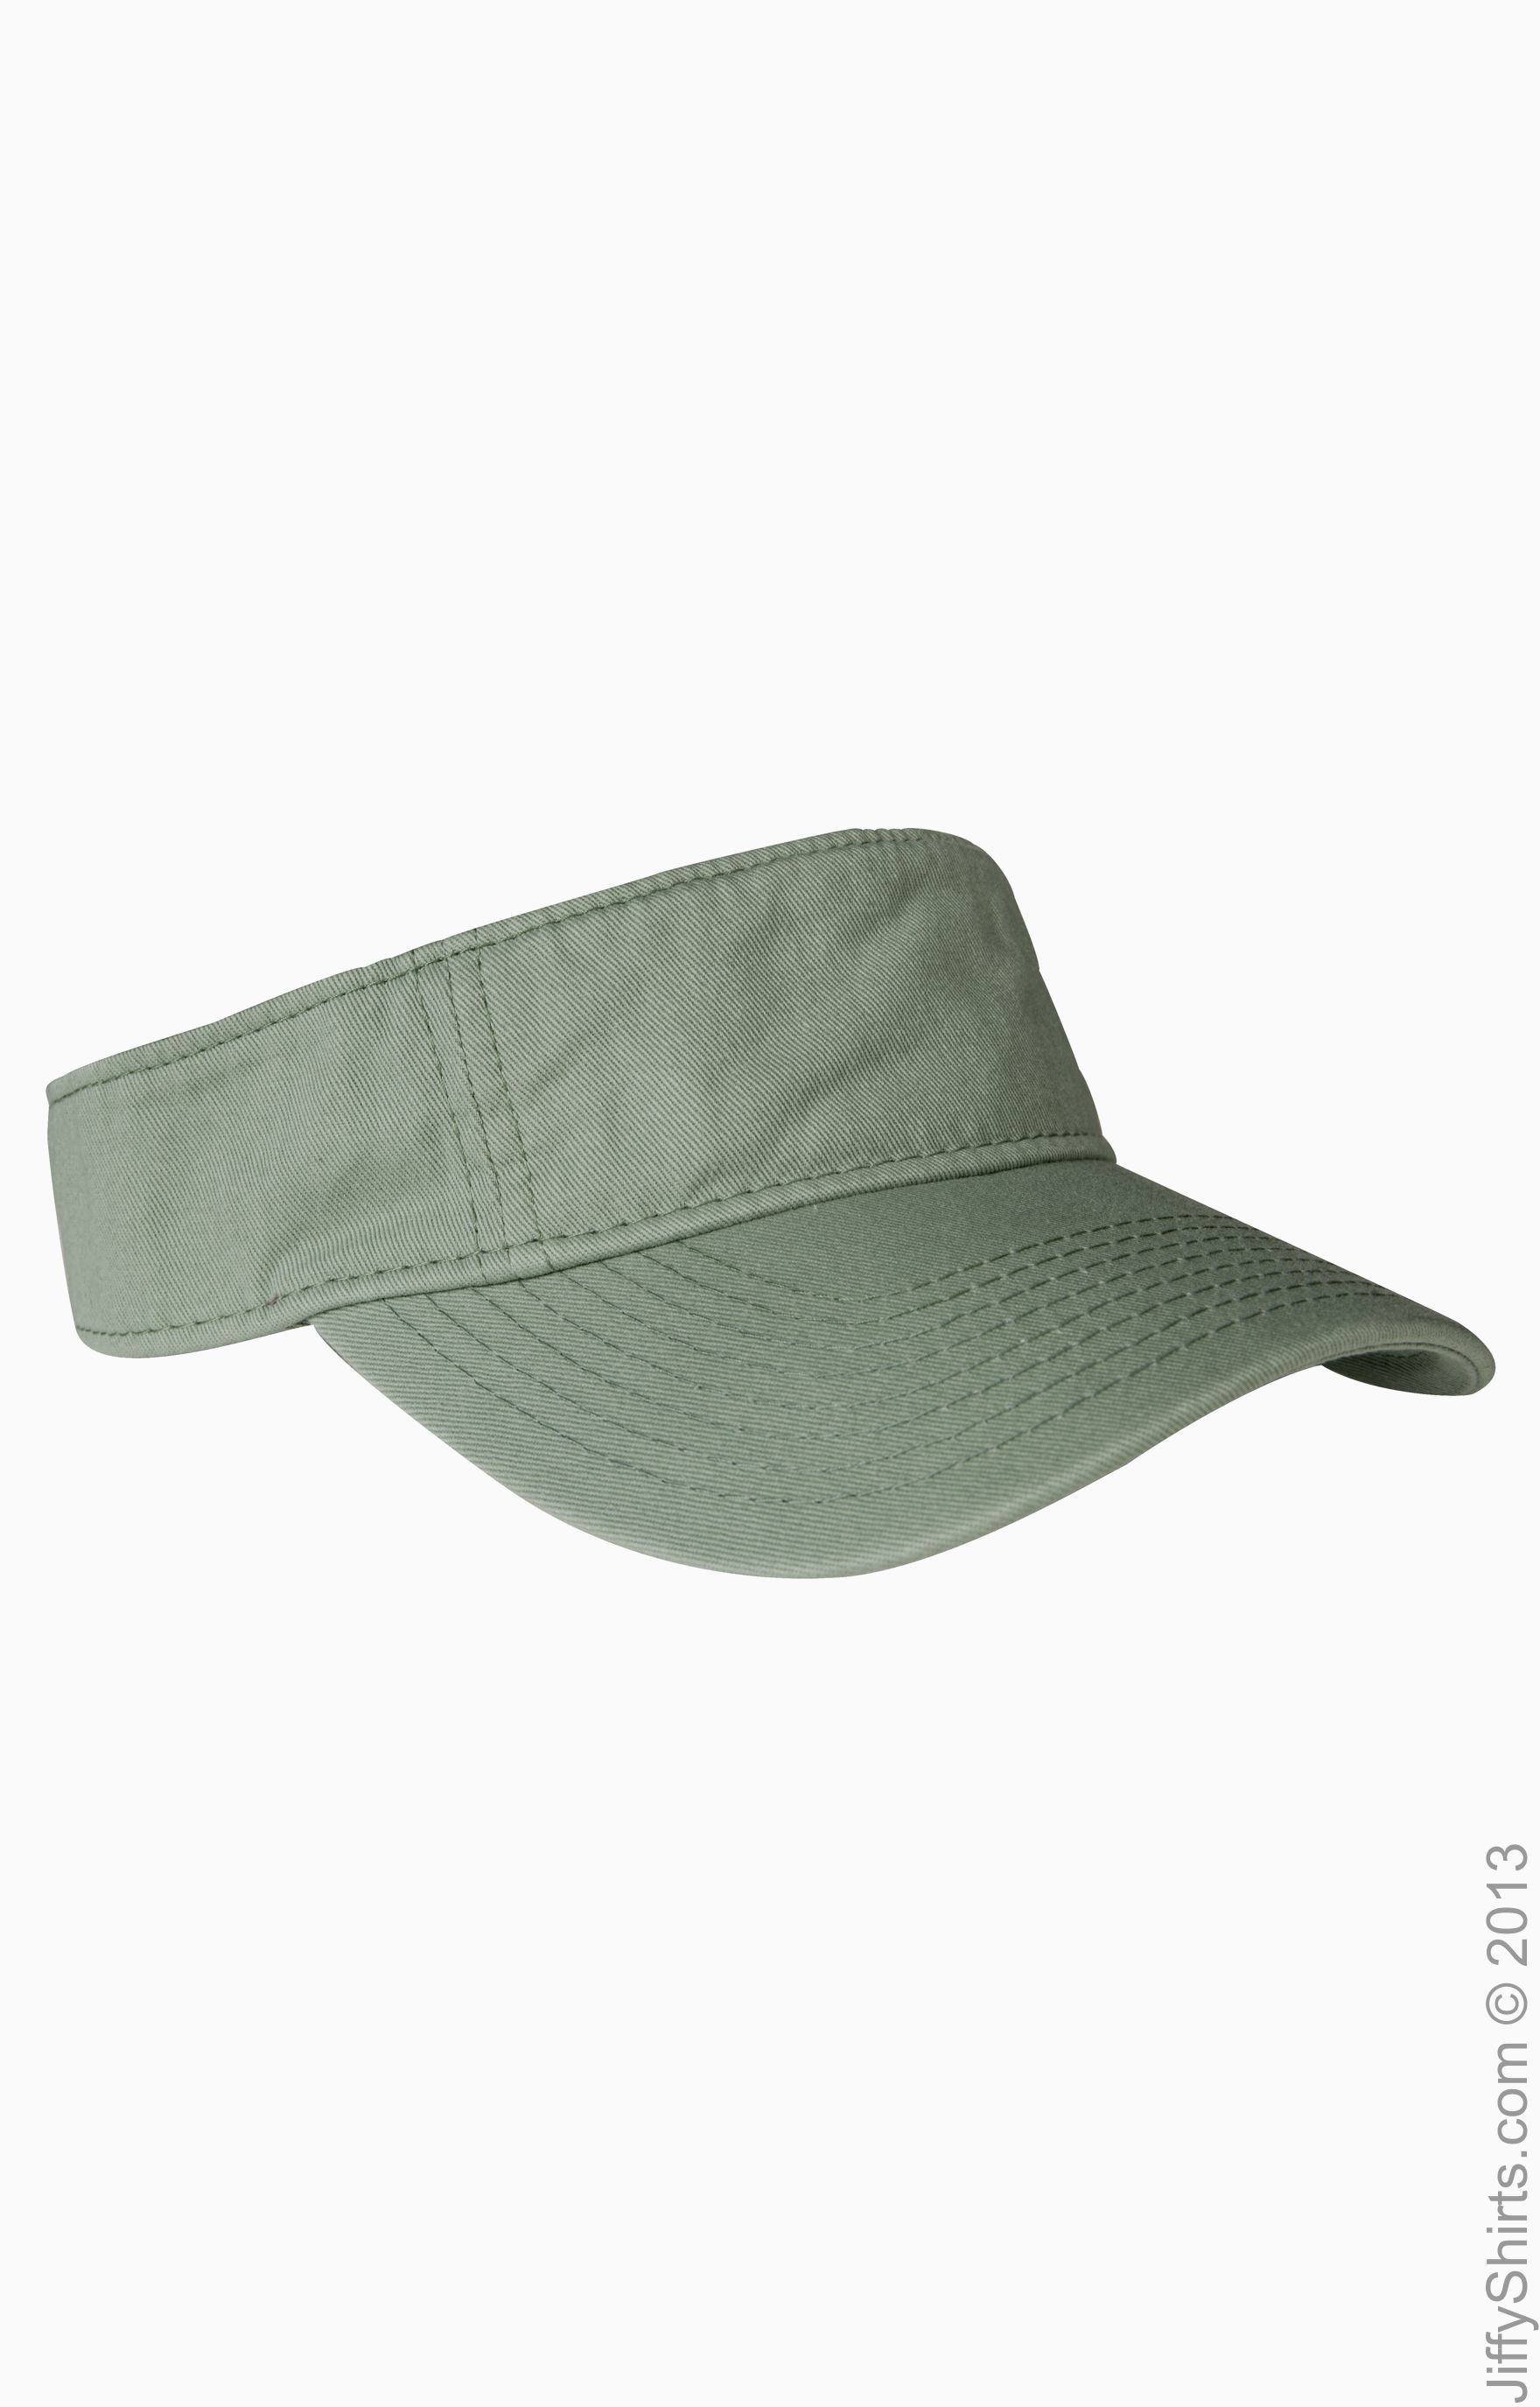 Authentic Pigment Direct-Dyed Twill Visor cilantro One Size 1915